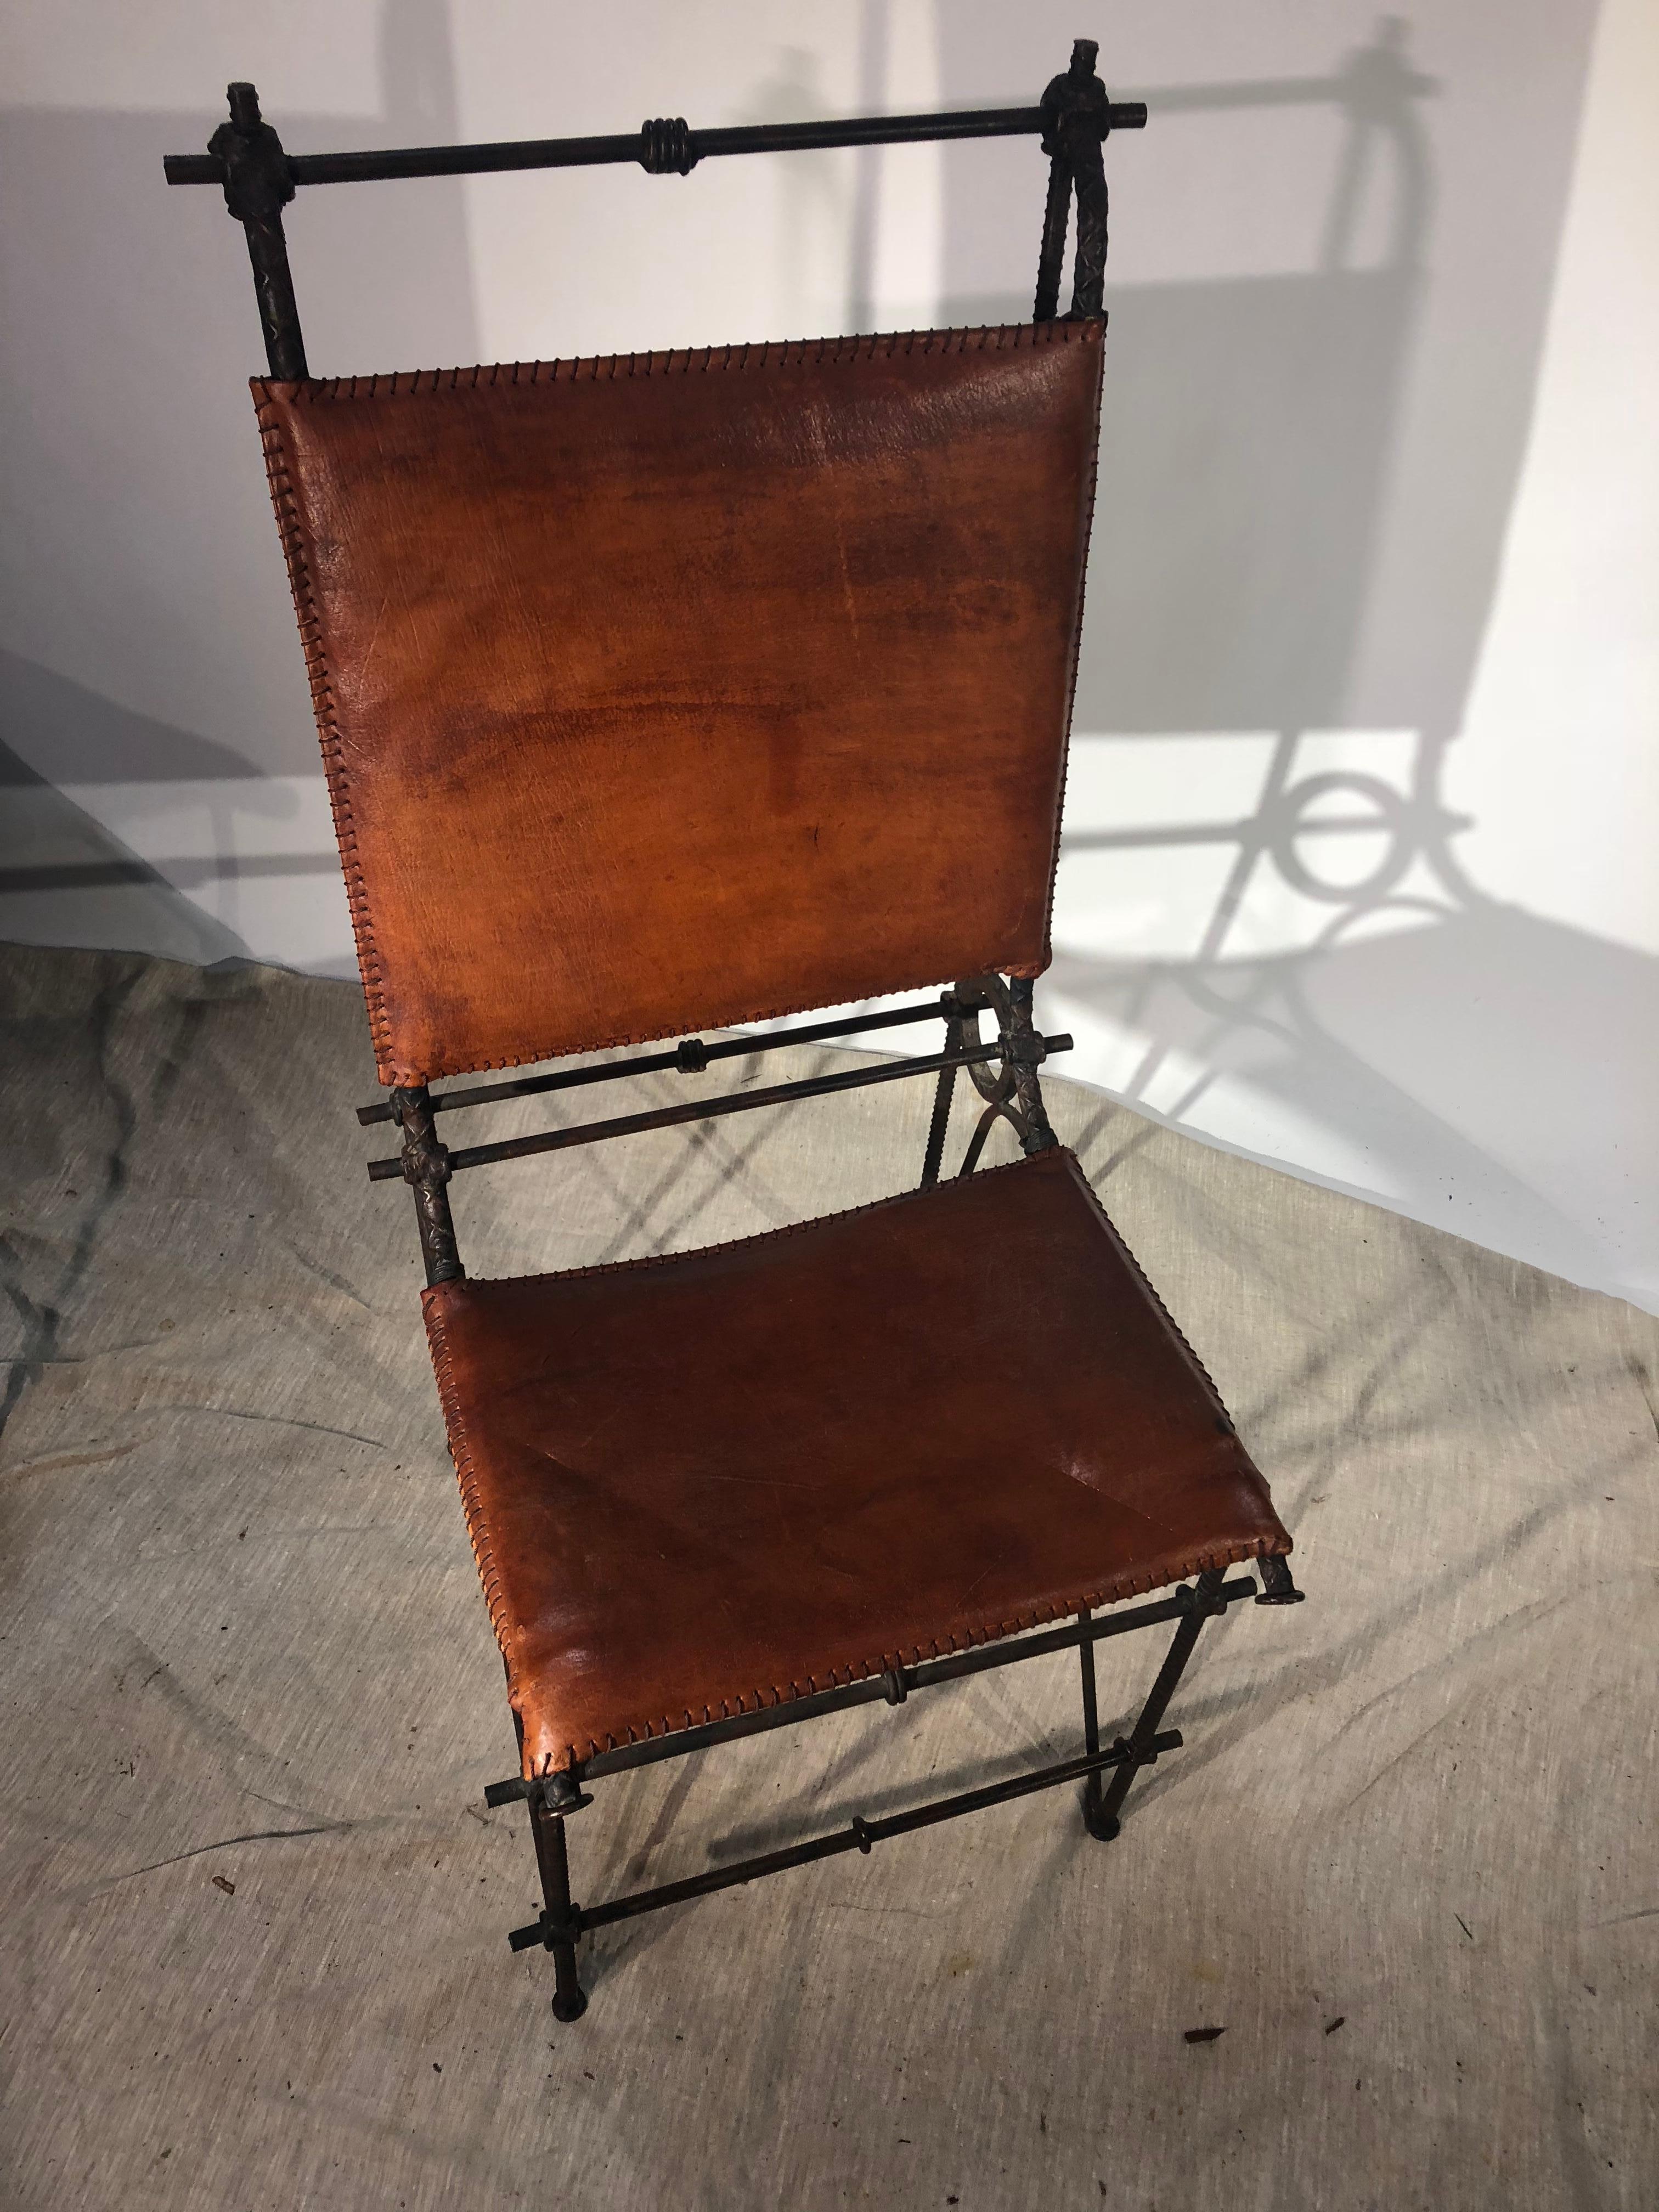 A set of 4 iron and saddle leather side chairs attributed to Ilana Goor, circa 1985. These interesting hand-crafter chairs are in the “Brutalist” style and are in good condition for their age and use.